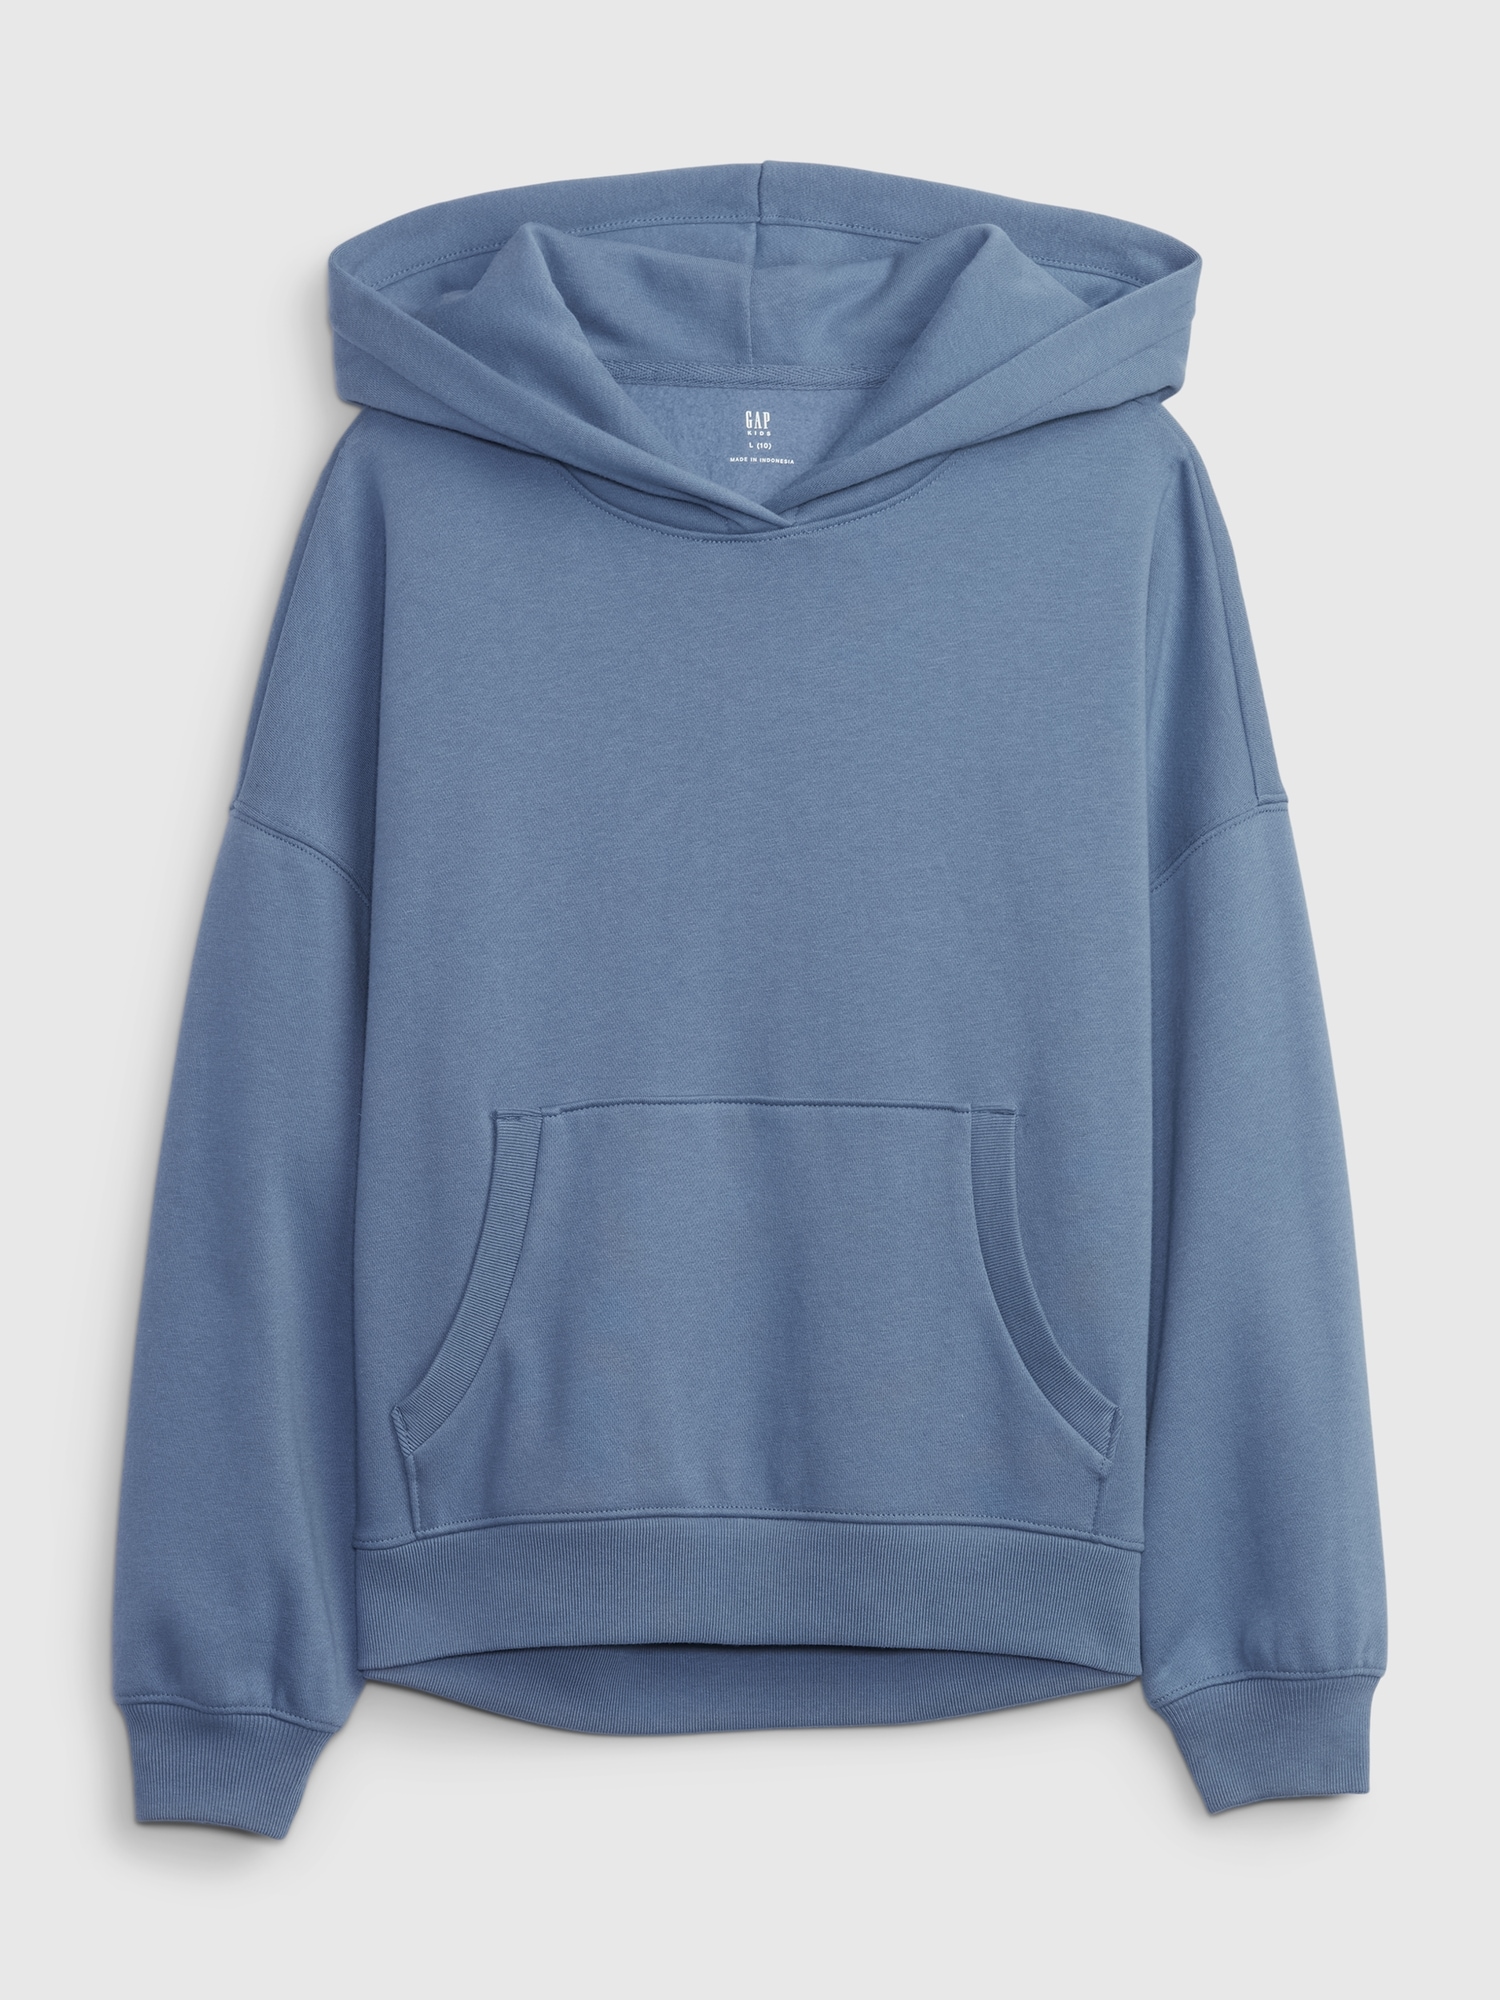 Hoodies & Sweatshirts for Boys at best Price in India | Myntra